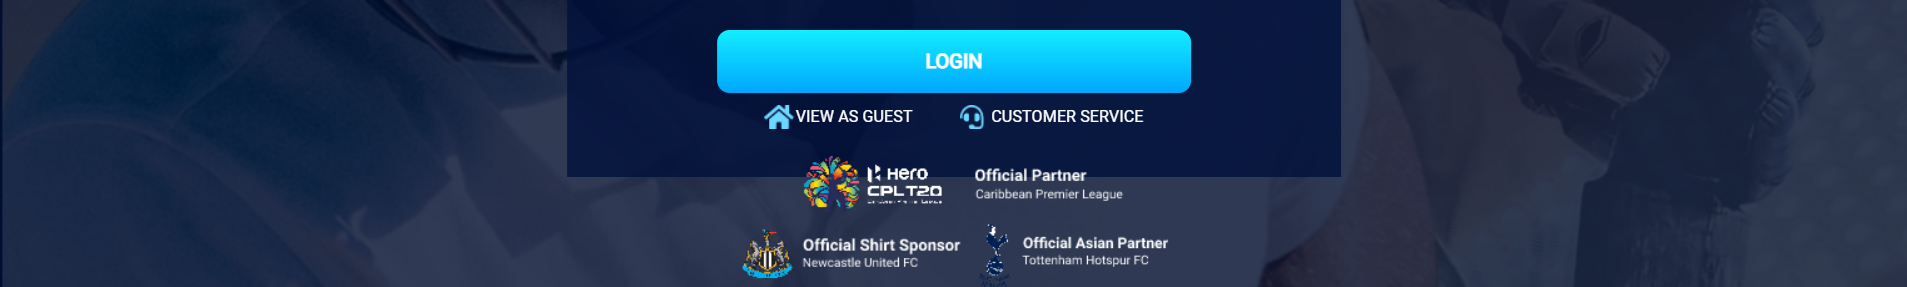 Picture showing the login button